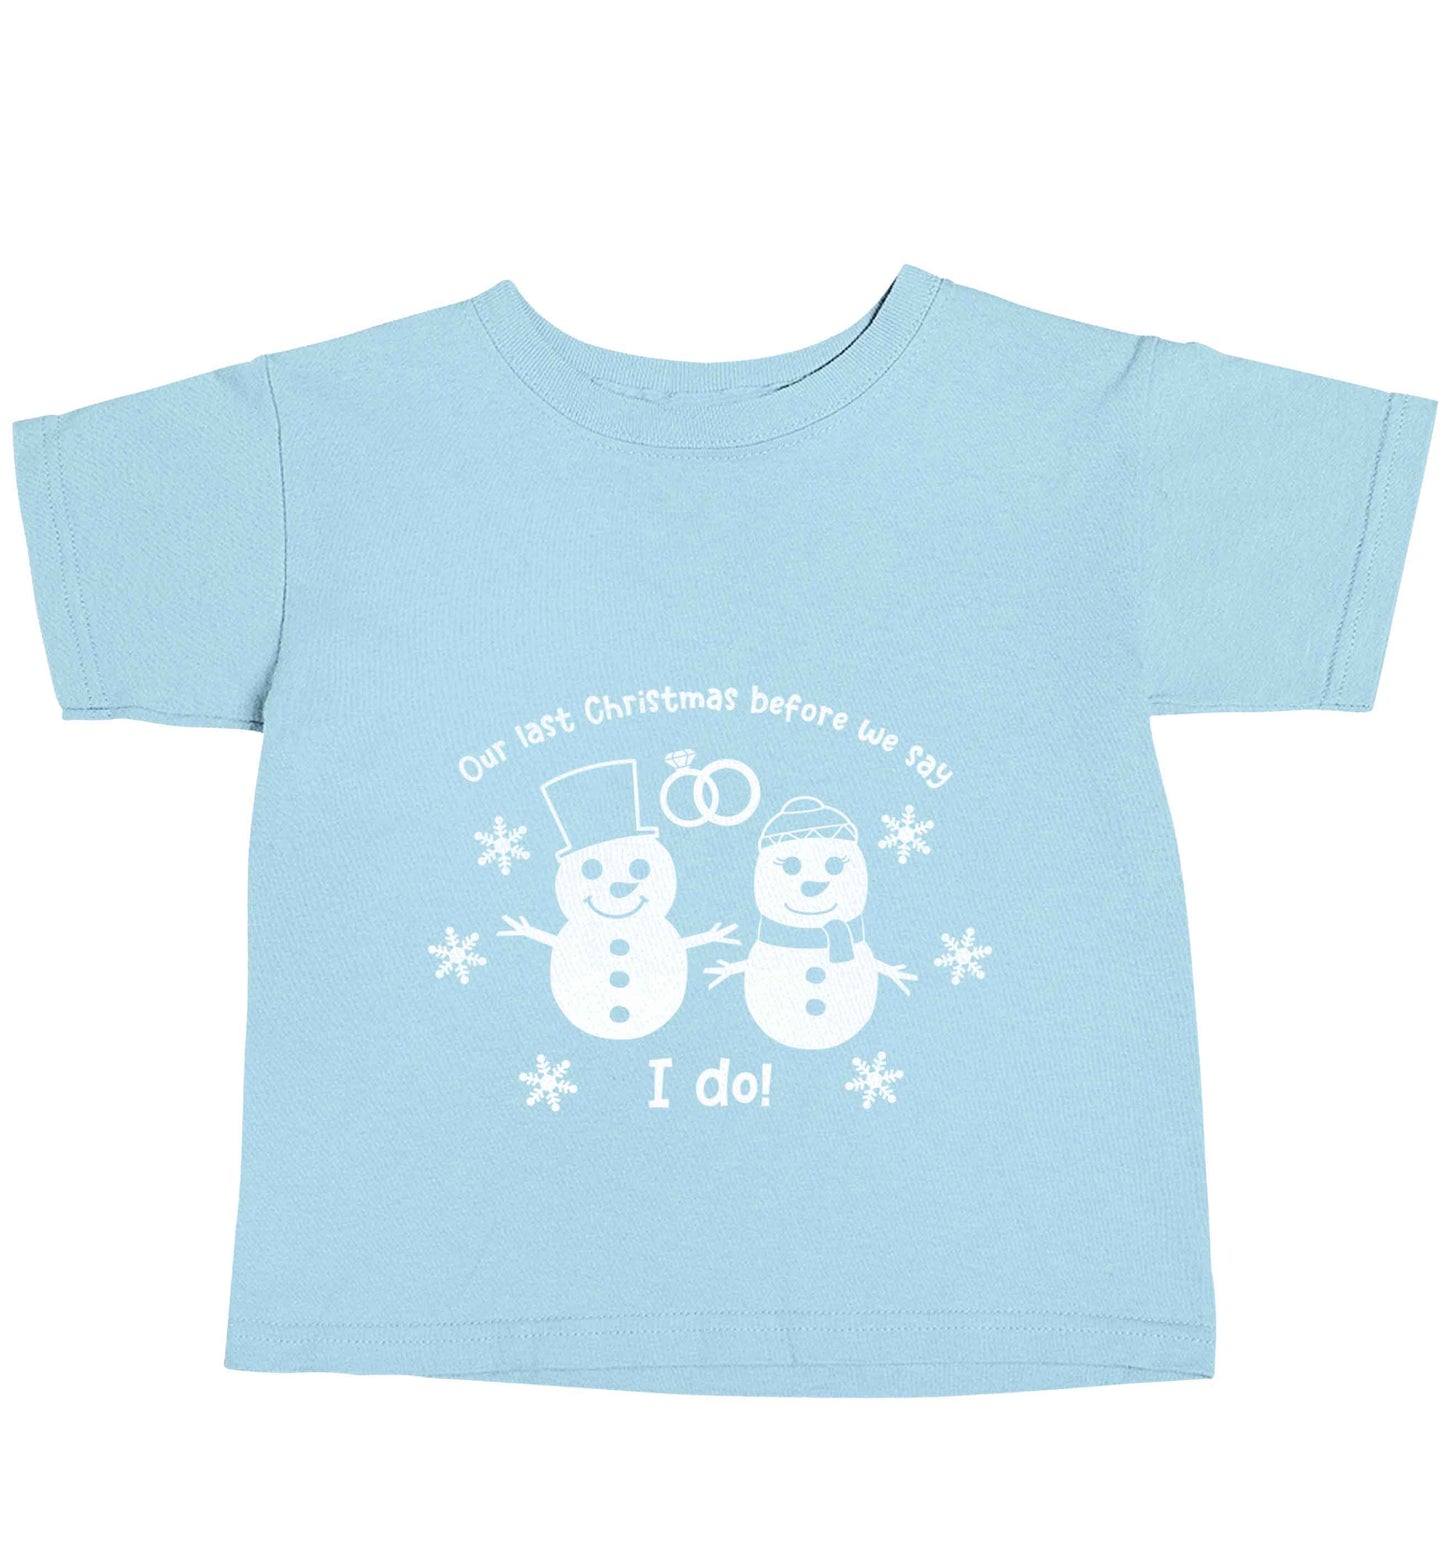 Last Christmas before we say I do light blue baby toddler Tshirt 2 Years